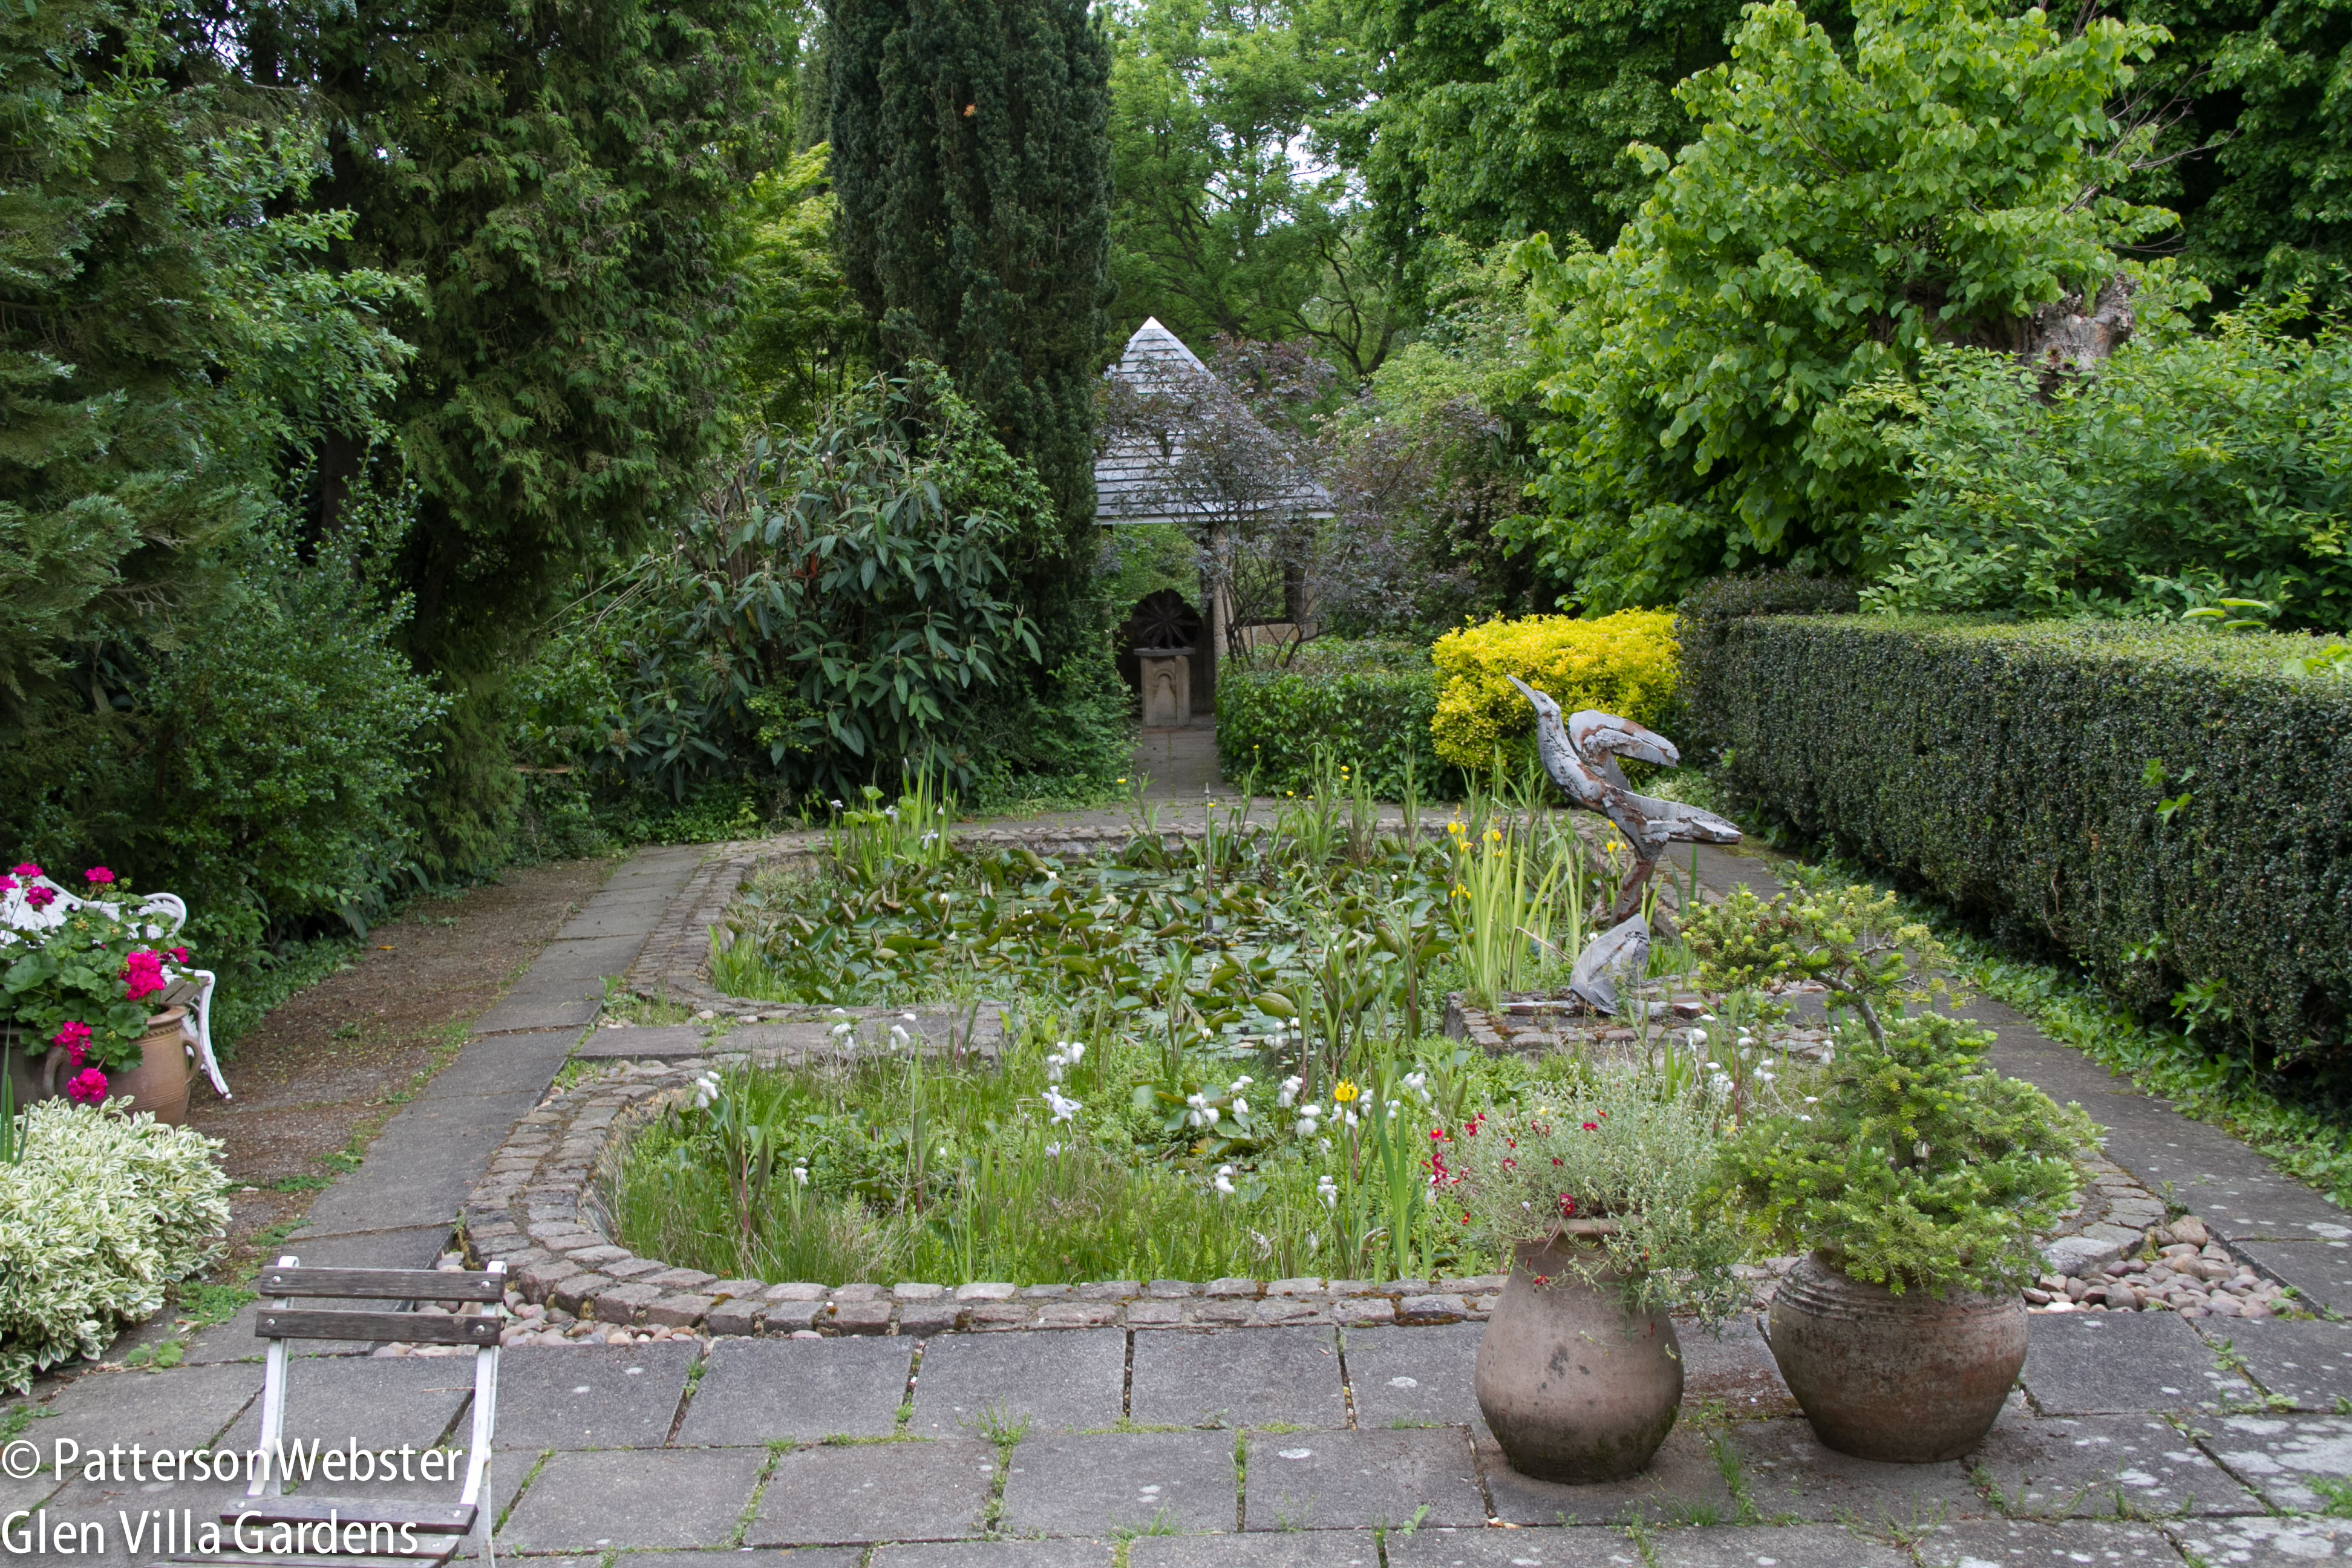 The garden is maintained primarily by volunteers which gives it a comfortable lived-in feeling.